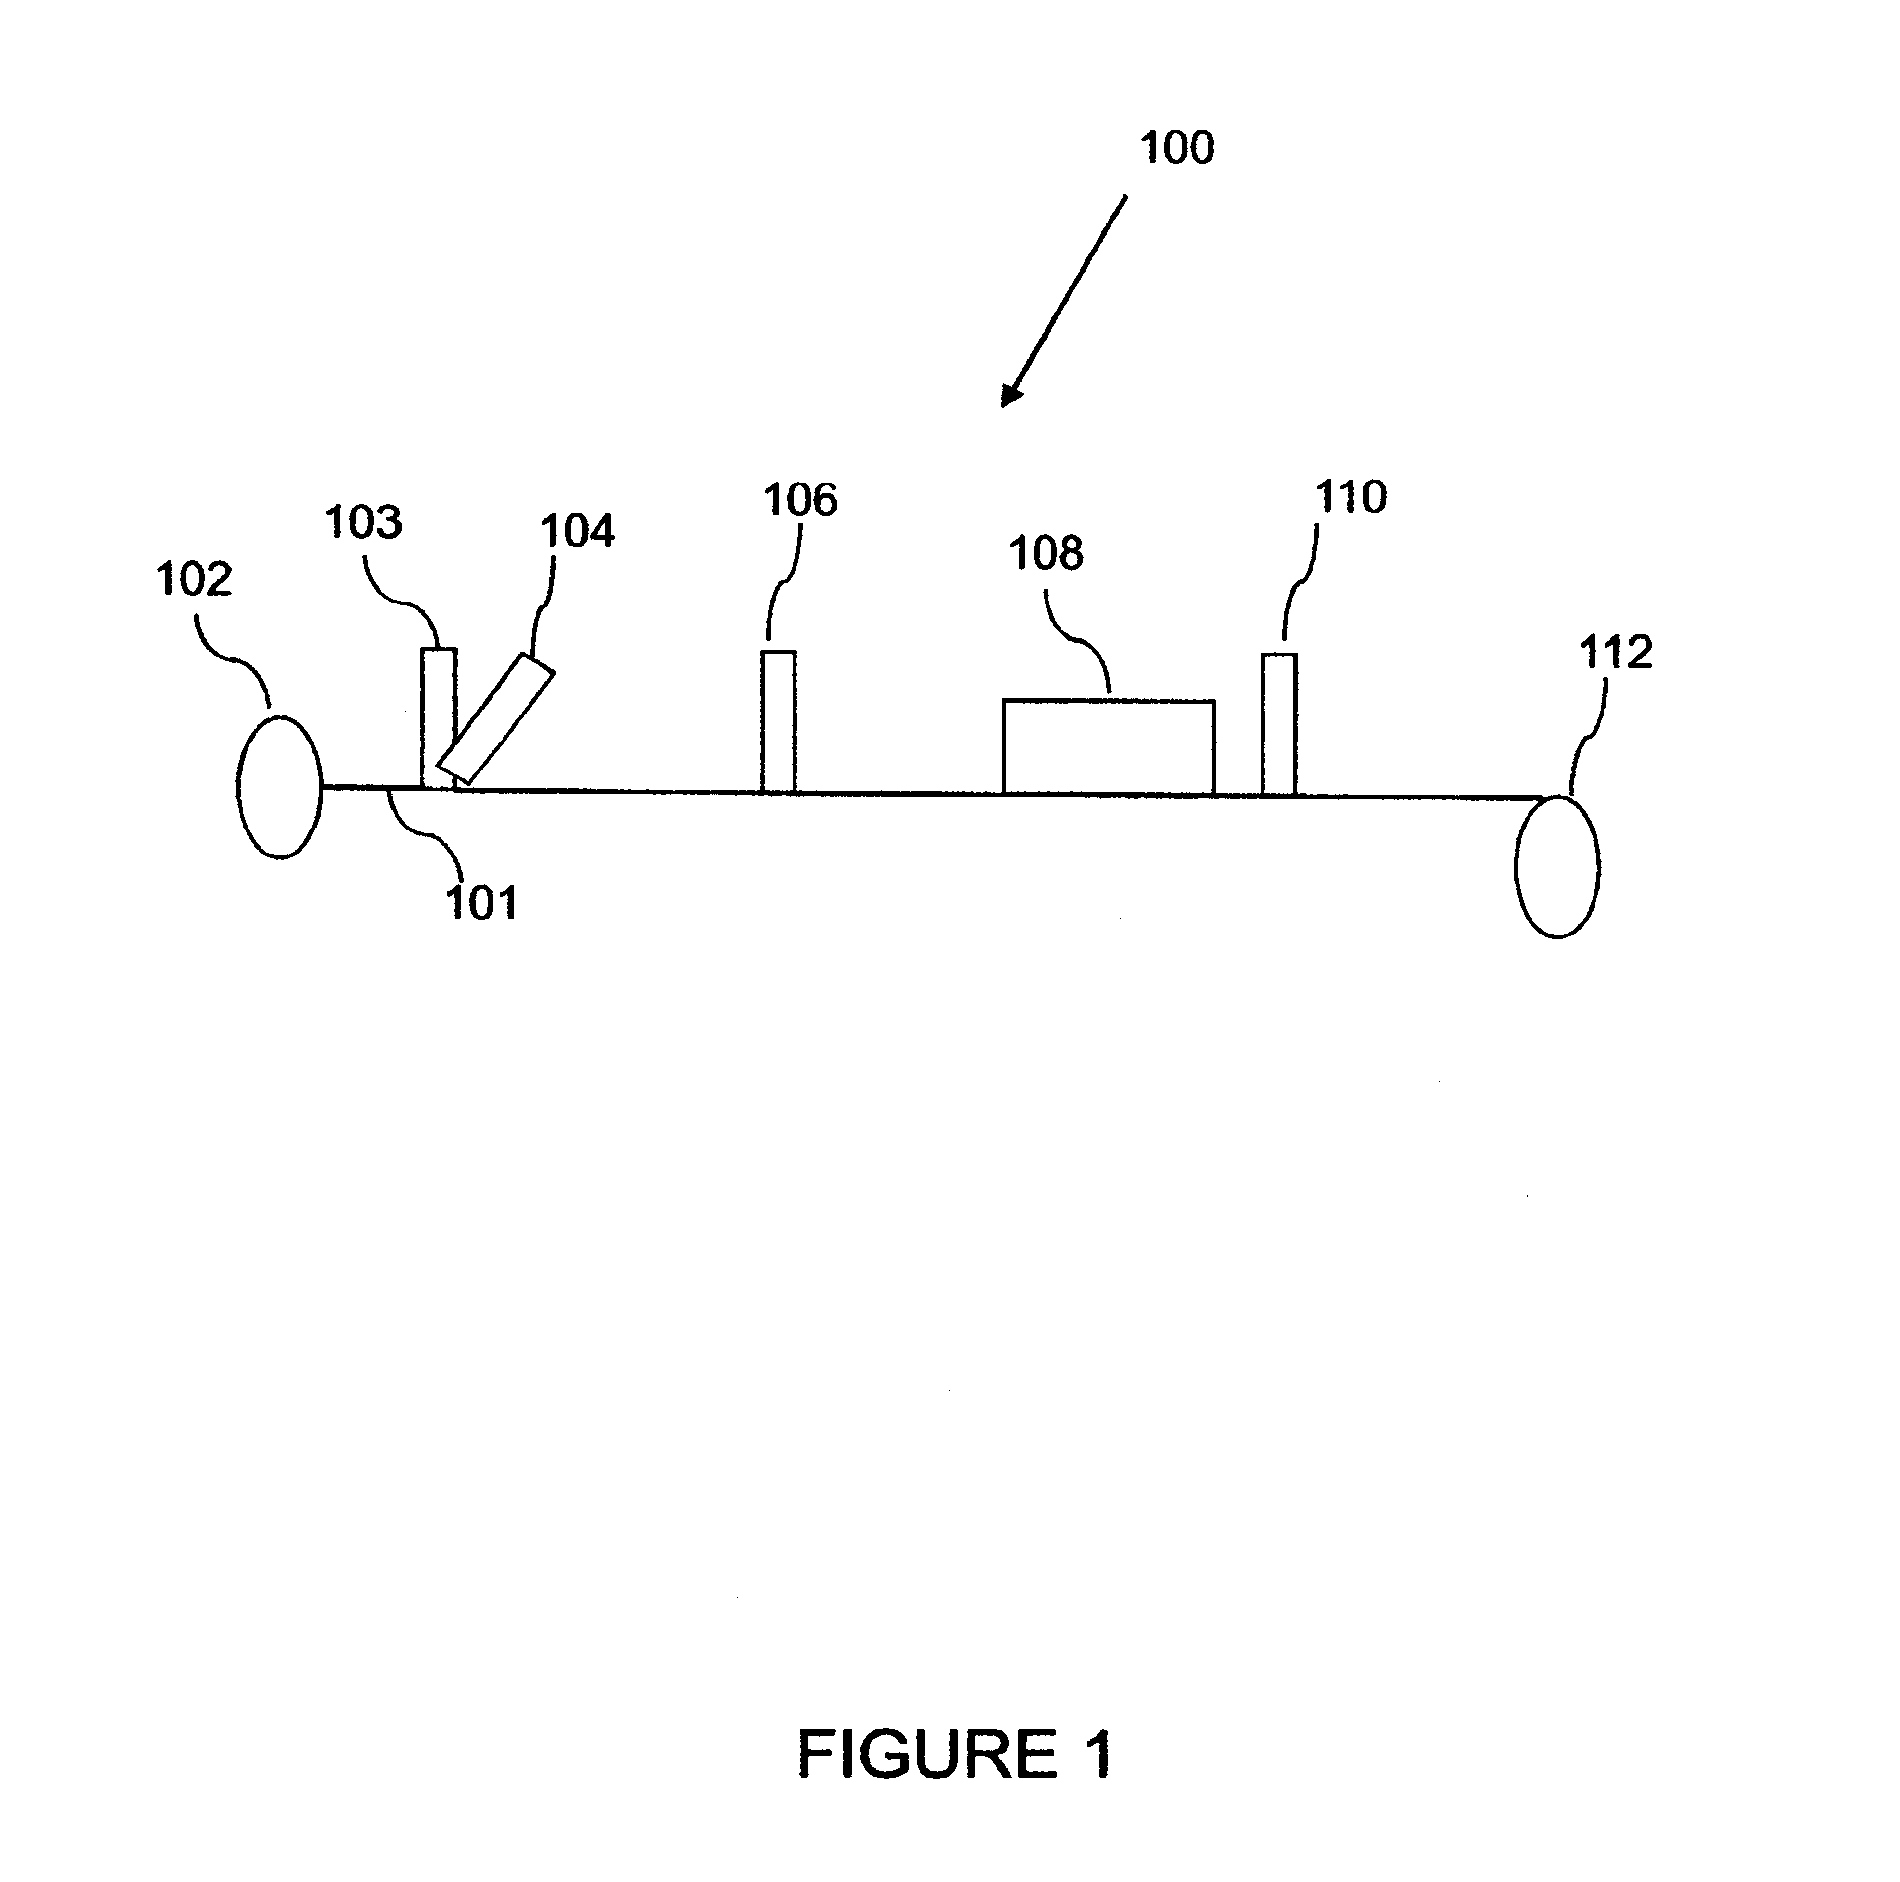 Method of manufacture of electrical wire and cable having a reduced coefficient of friction and required pulling force